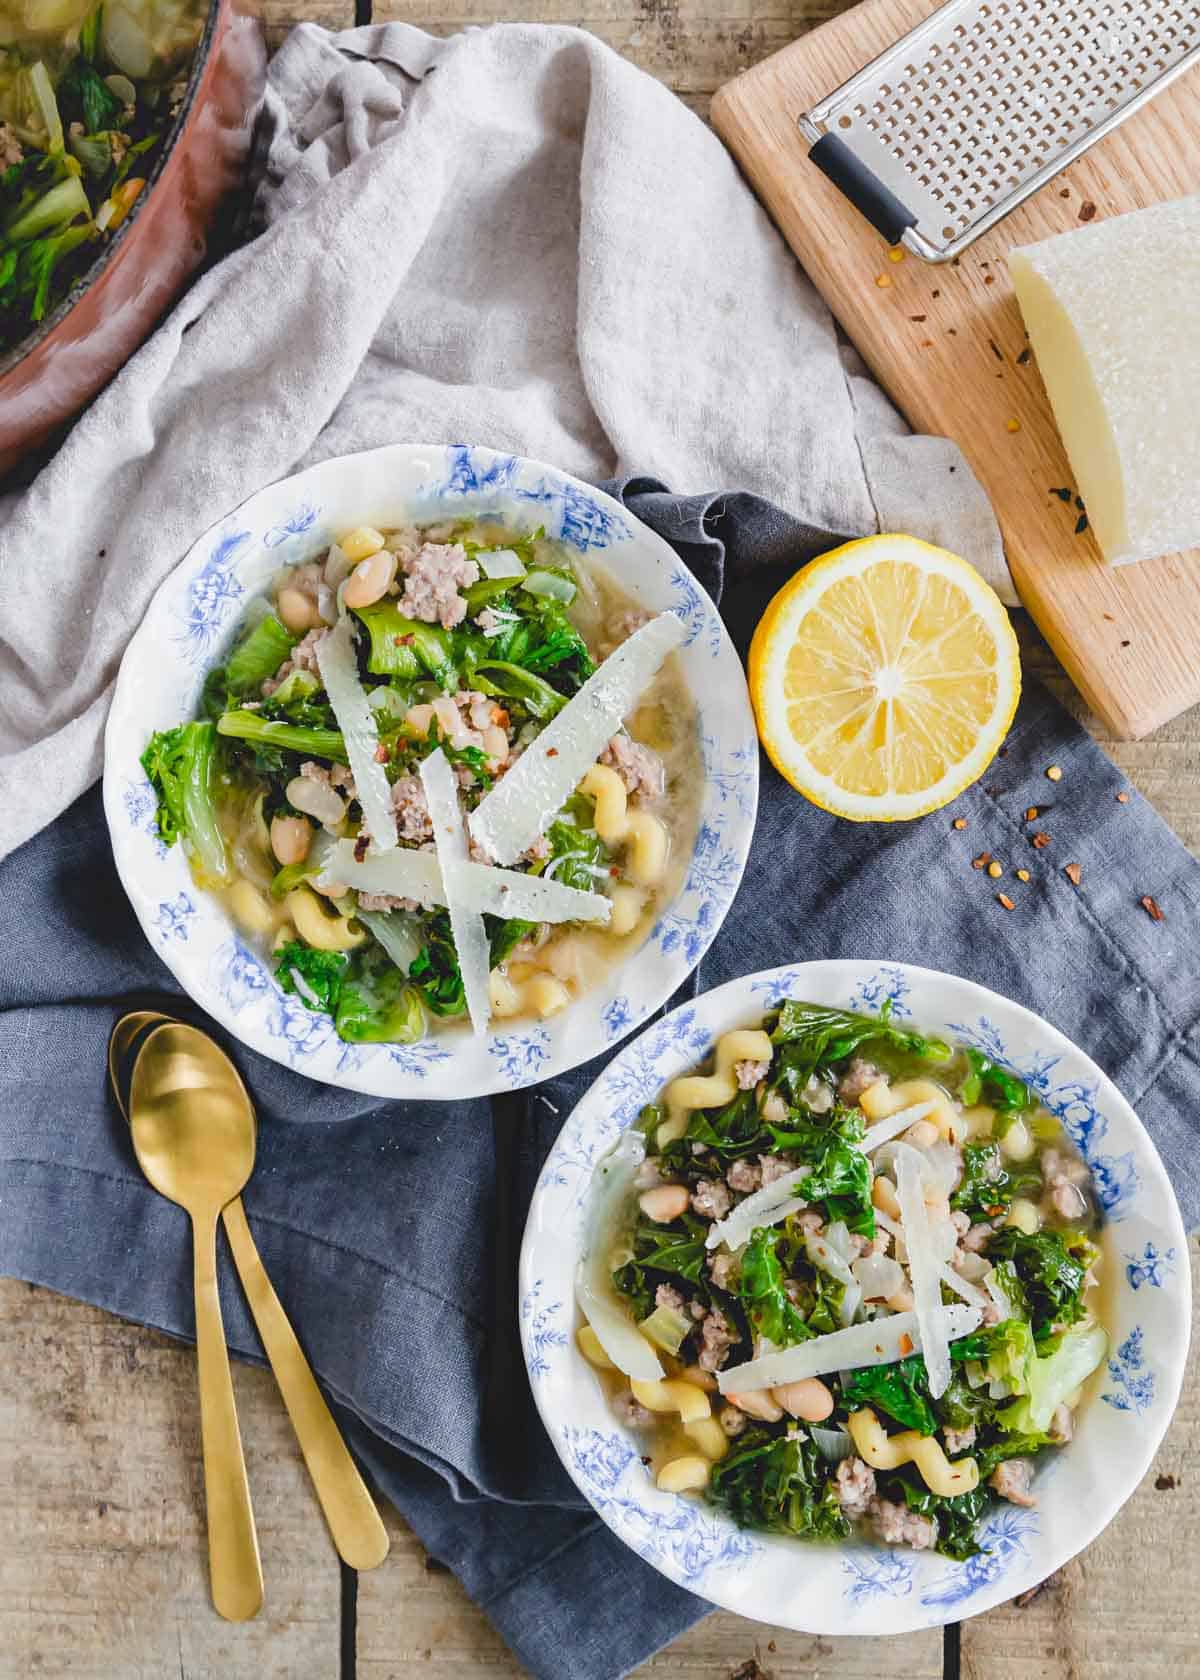 Escarole soup recipe with white beans, ground sausage and pasta in bowls with fresh lemon on the side.